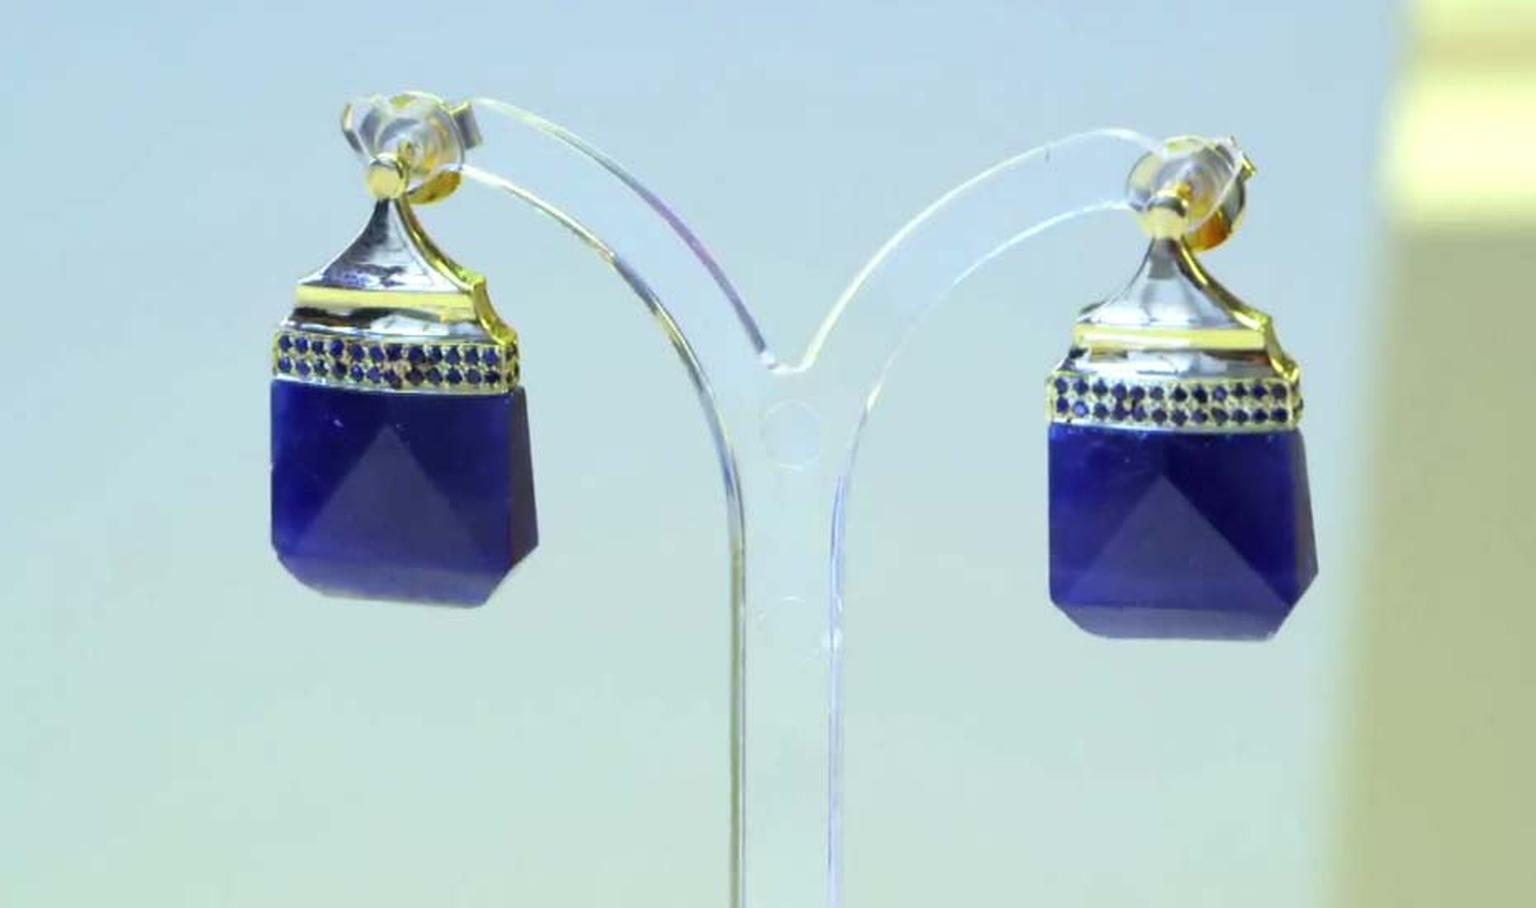 Jade Jagger Never Ending jewellery collection earrings with blue sapphires. Available at 1stdibs.com.